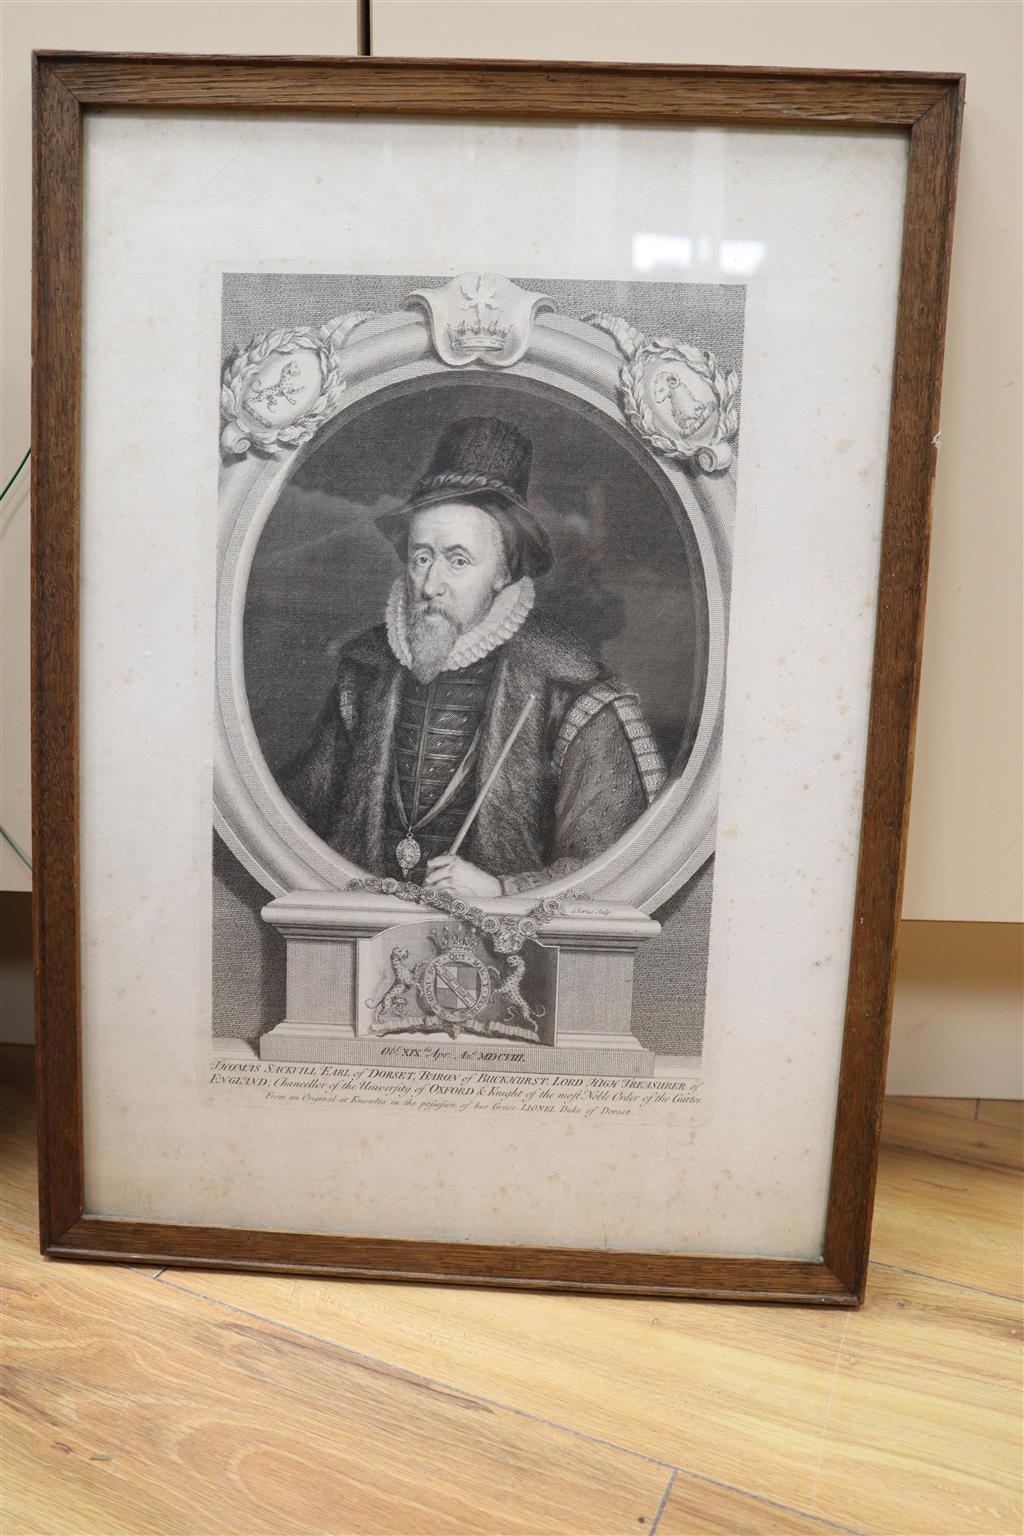 An 18th century engraved portrait of Thomas Sackville, Earl of Dorset, overall 48 x 34cm